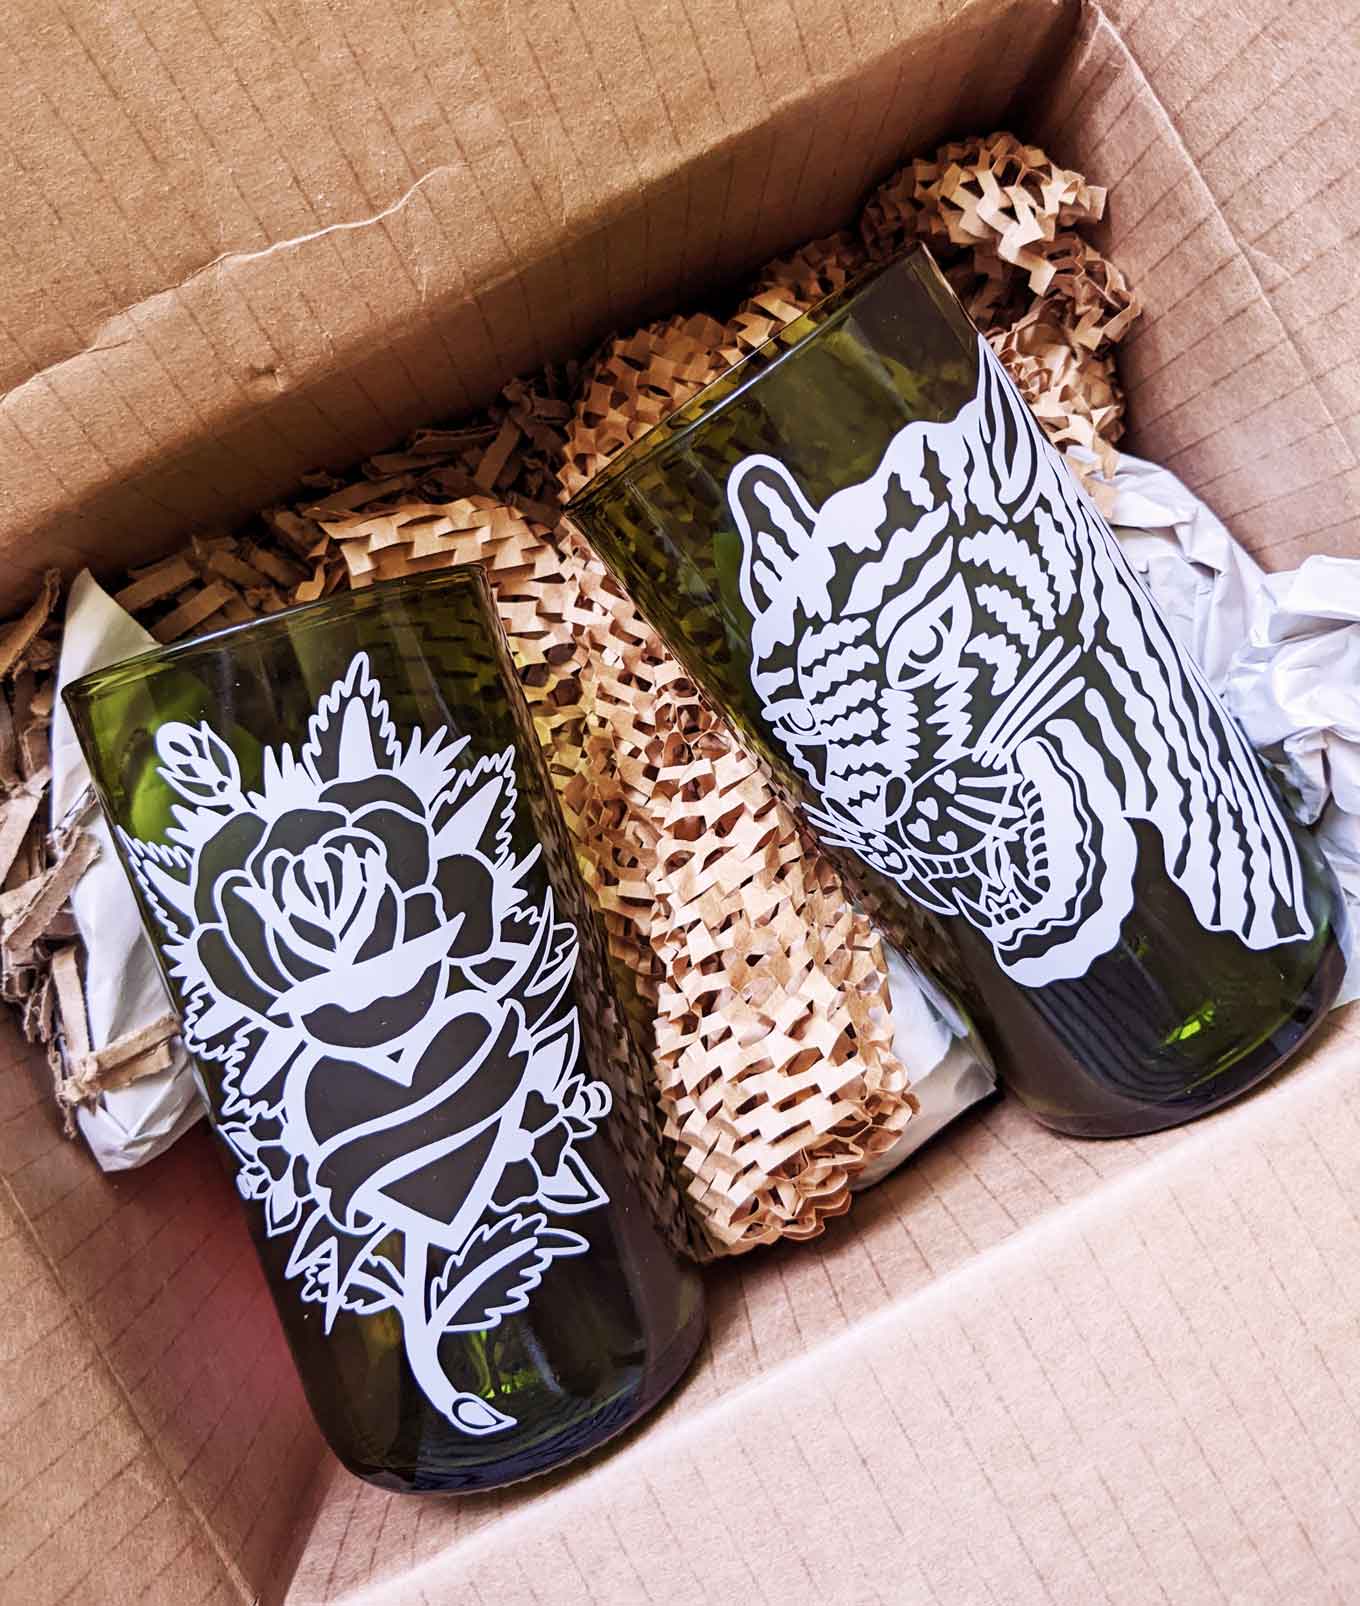 Two green recycled glasses, one with a flower design printed on it and other with a tiger design, both sitting in the paper-based packaging they were shipped in